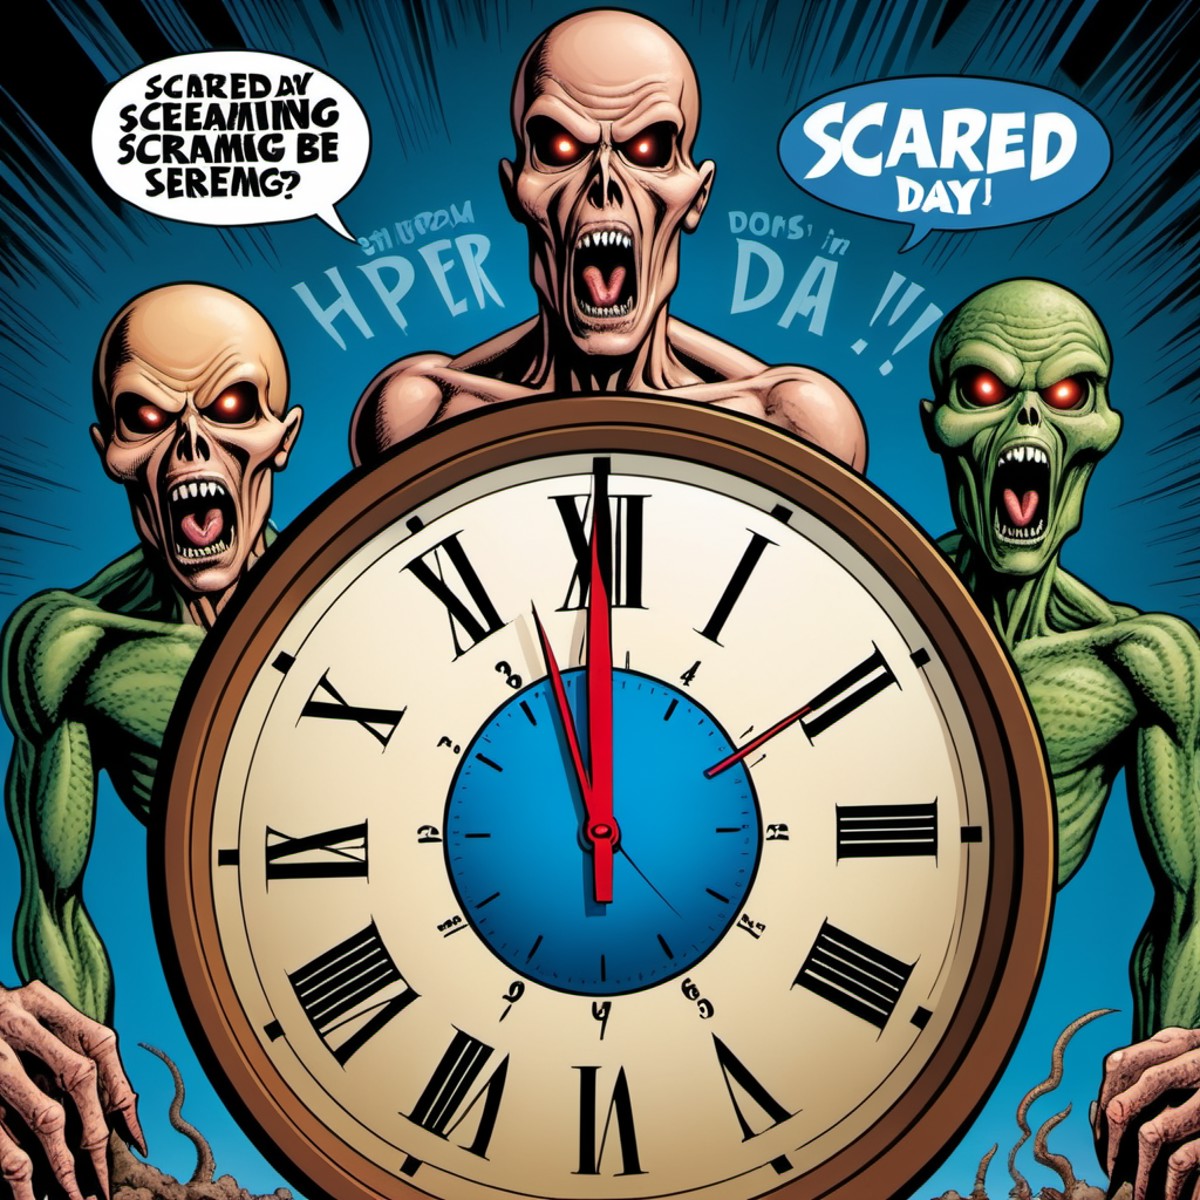 doomsday clock, text saying "Dooms Day", scared aliens screaming, hyper-detailed satiric graphic illustration